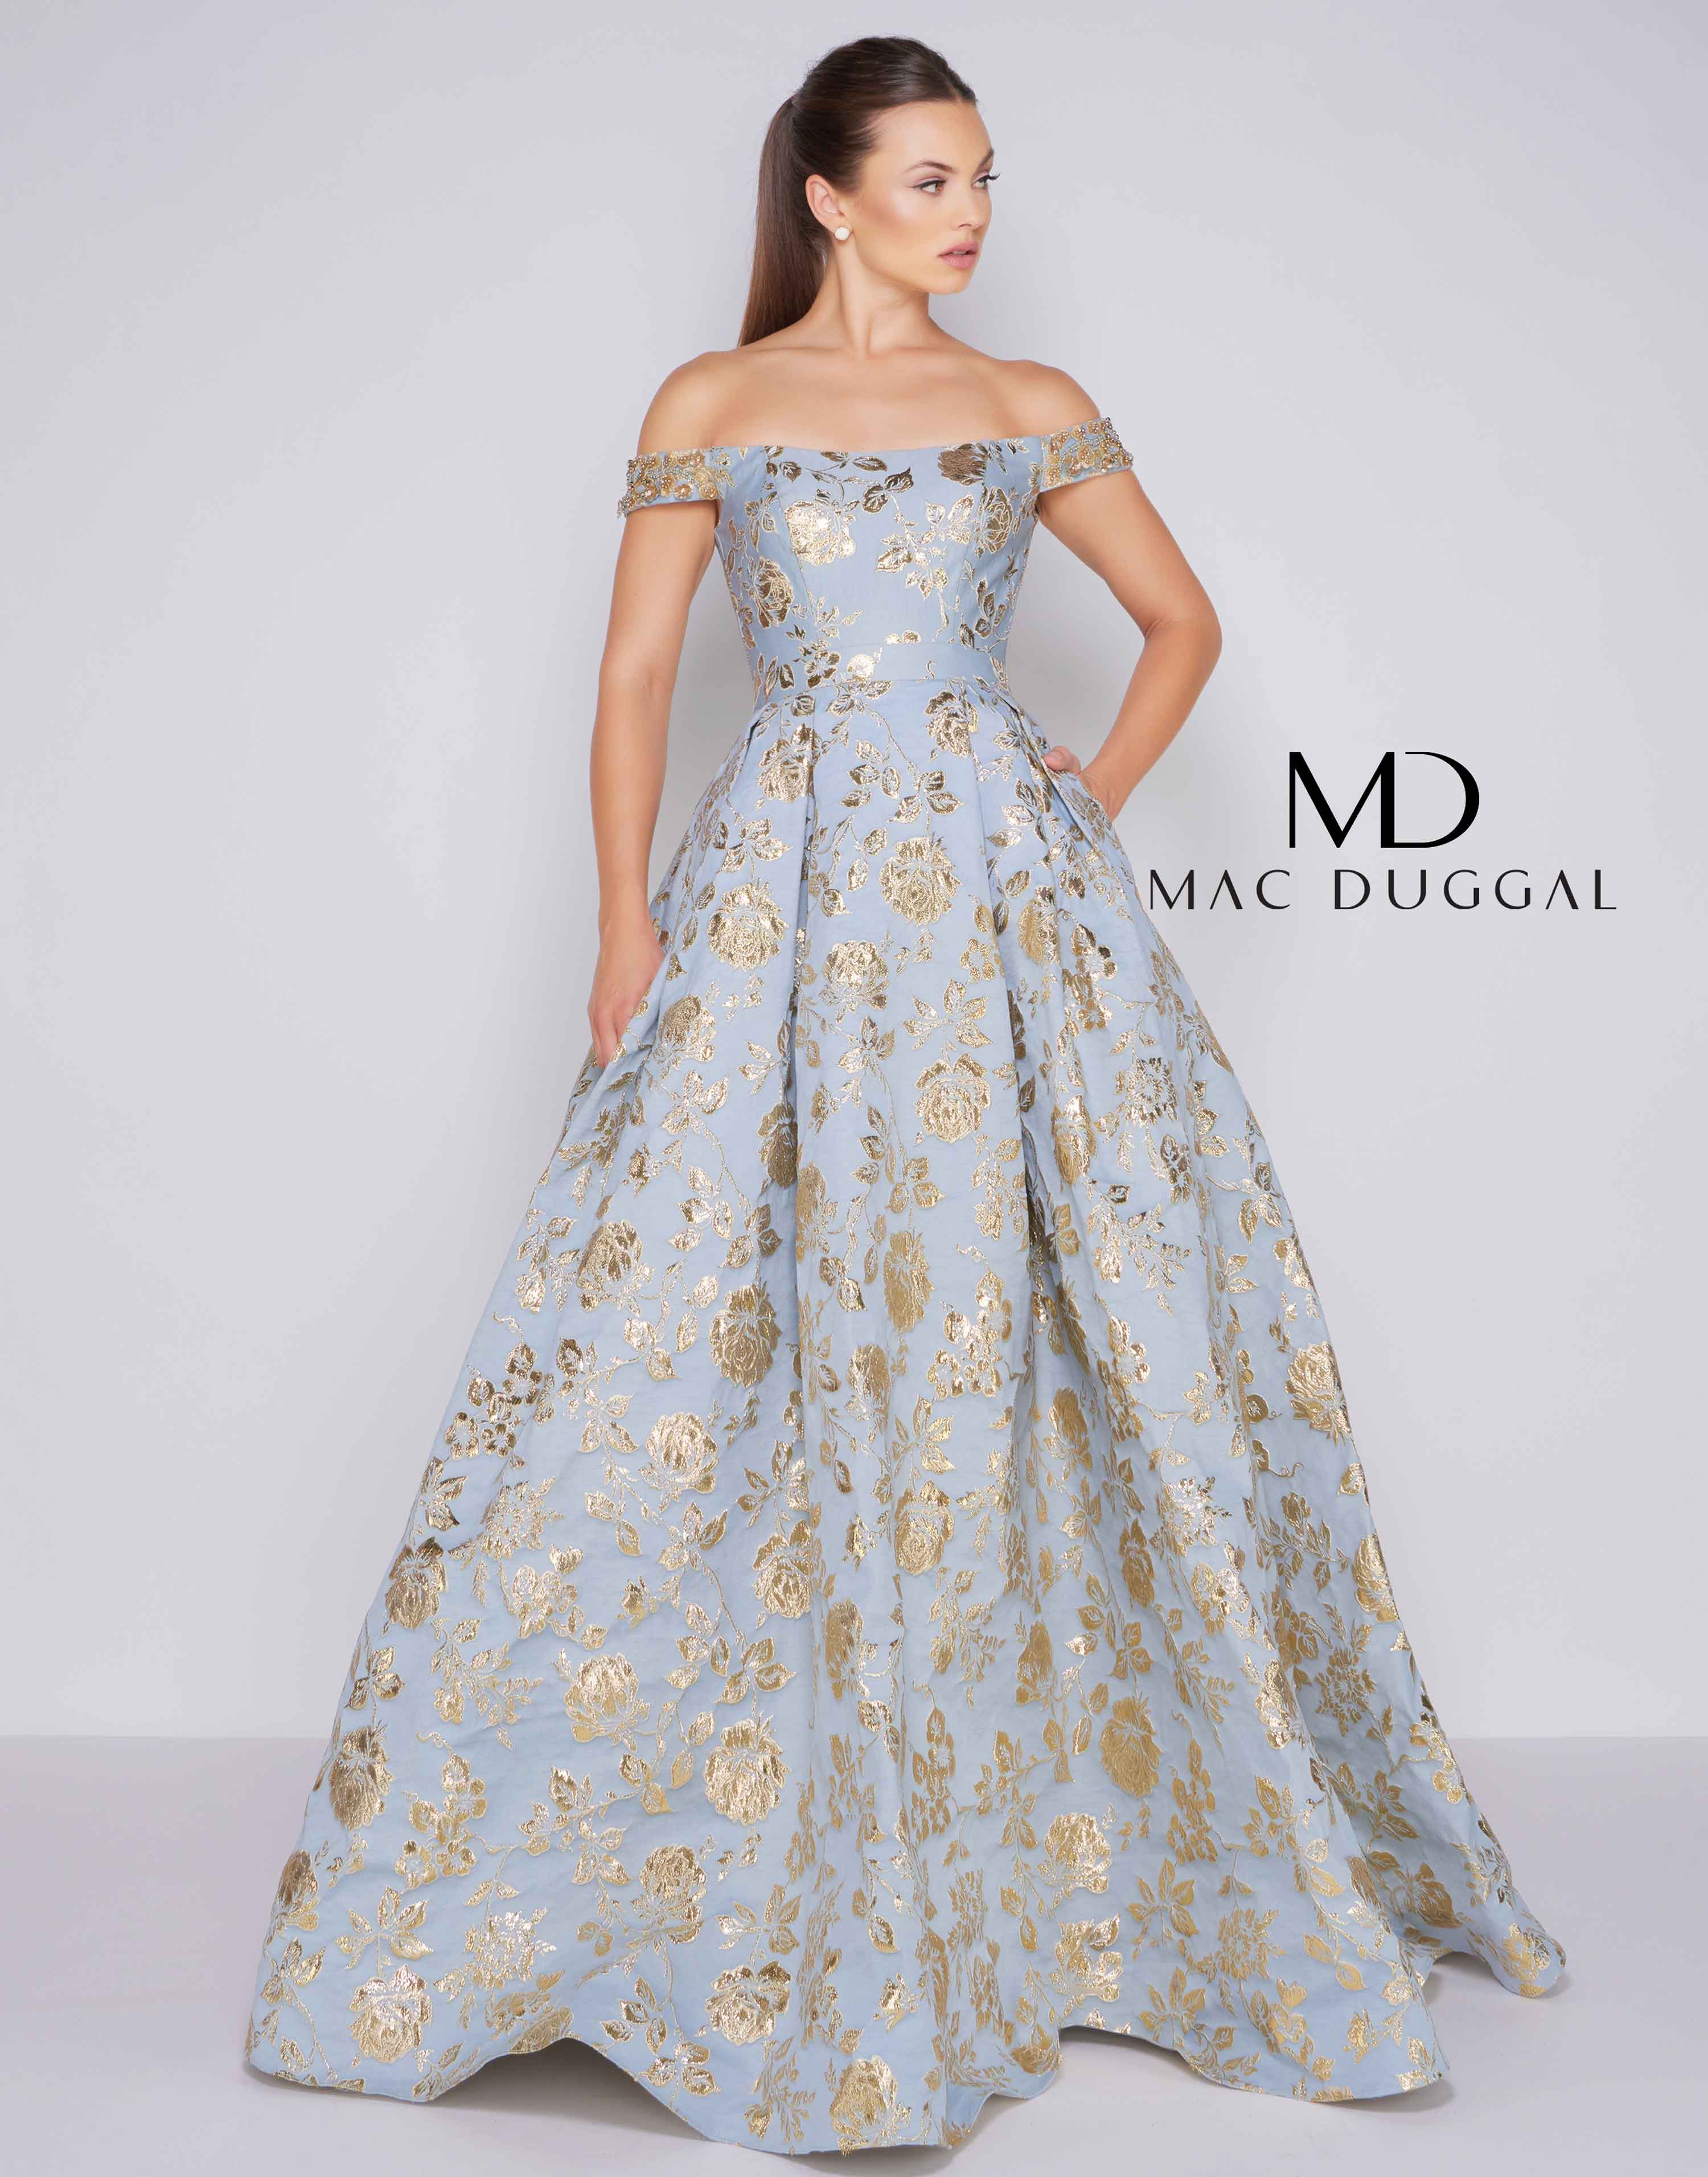 Mac Duggal Ball Gown| The Dressing Room